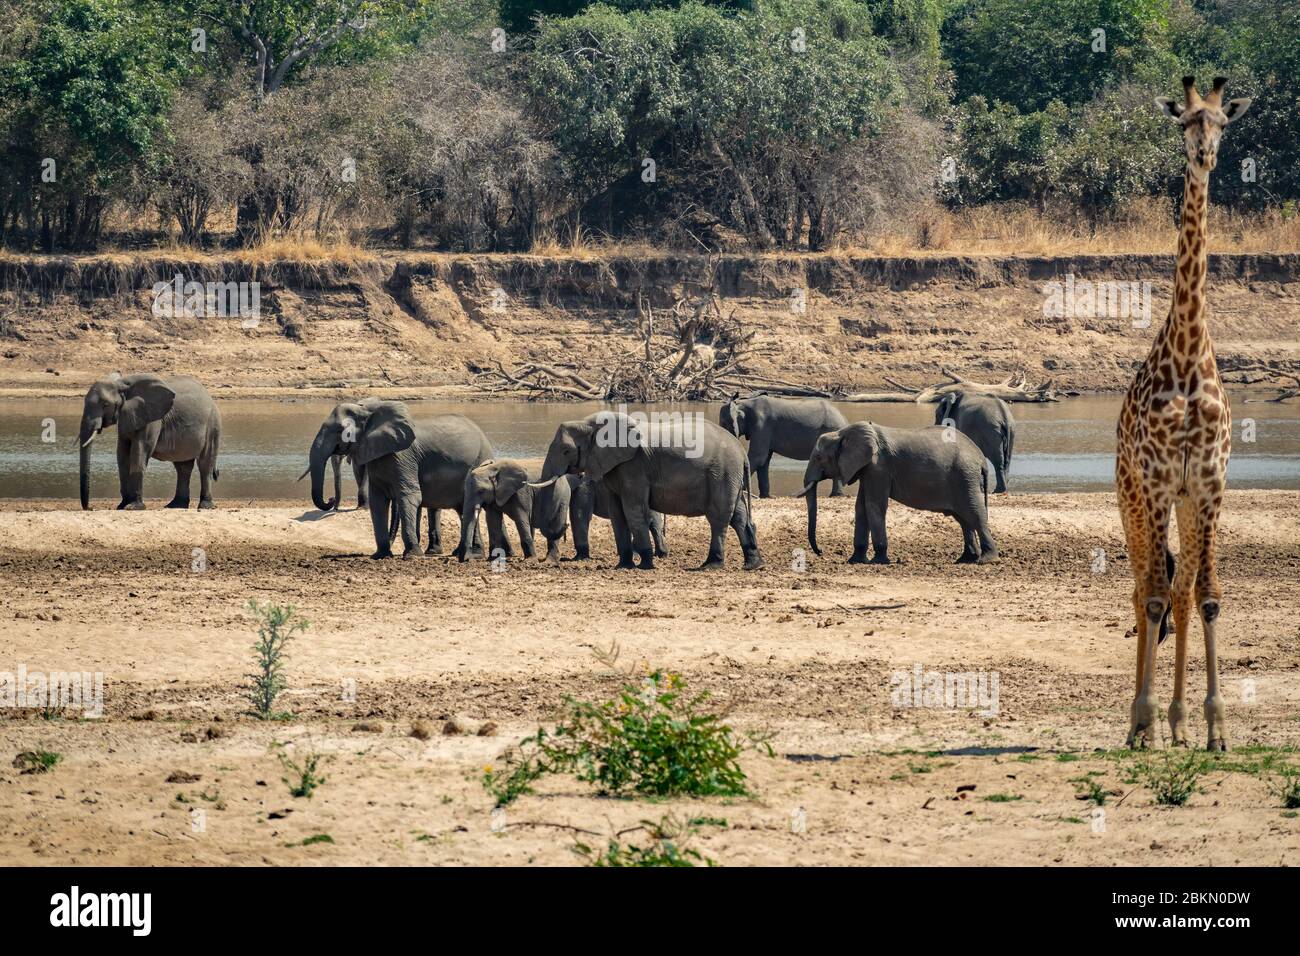 Group of elephants near river with blurred giraffe Stock Photo